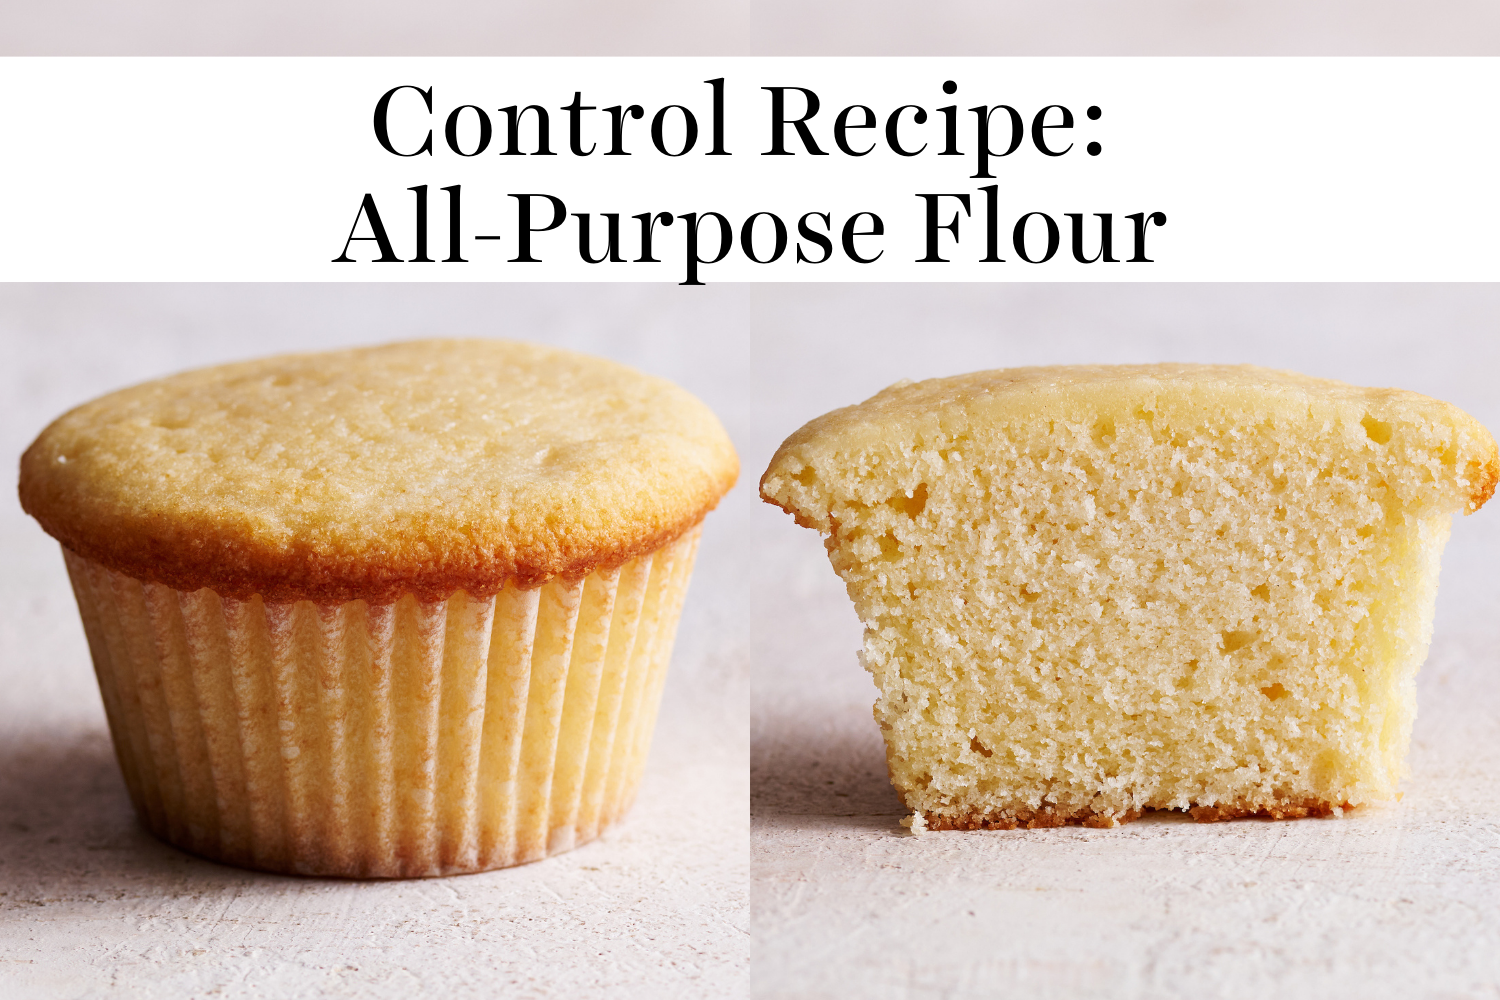 the control recipe as a whole cupcake and also cut in half. This was made with all-purpose flour.